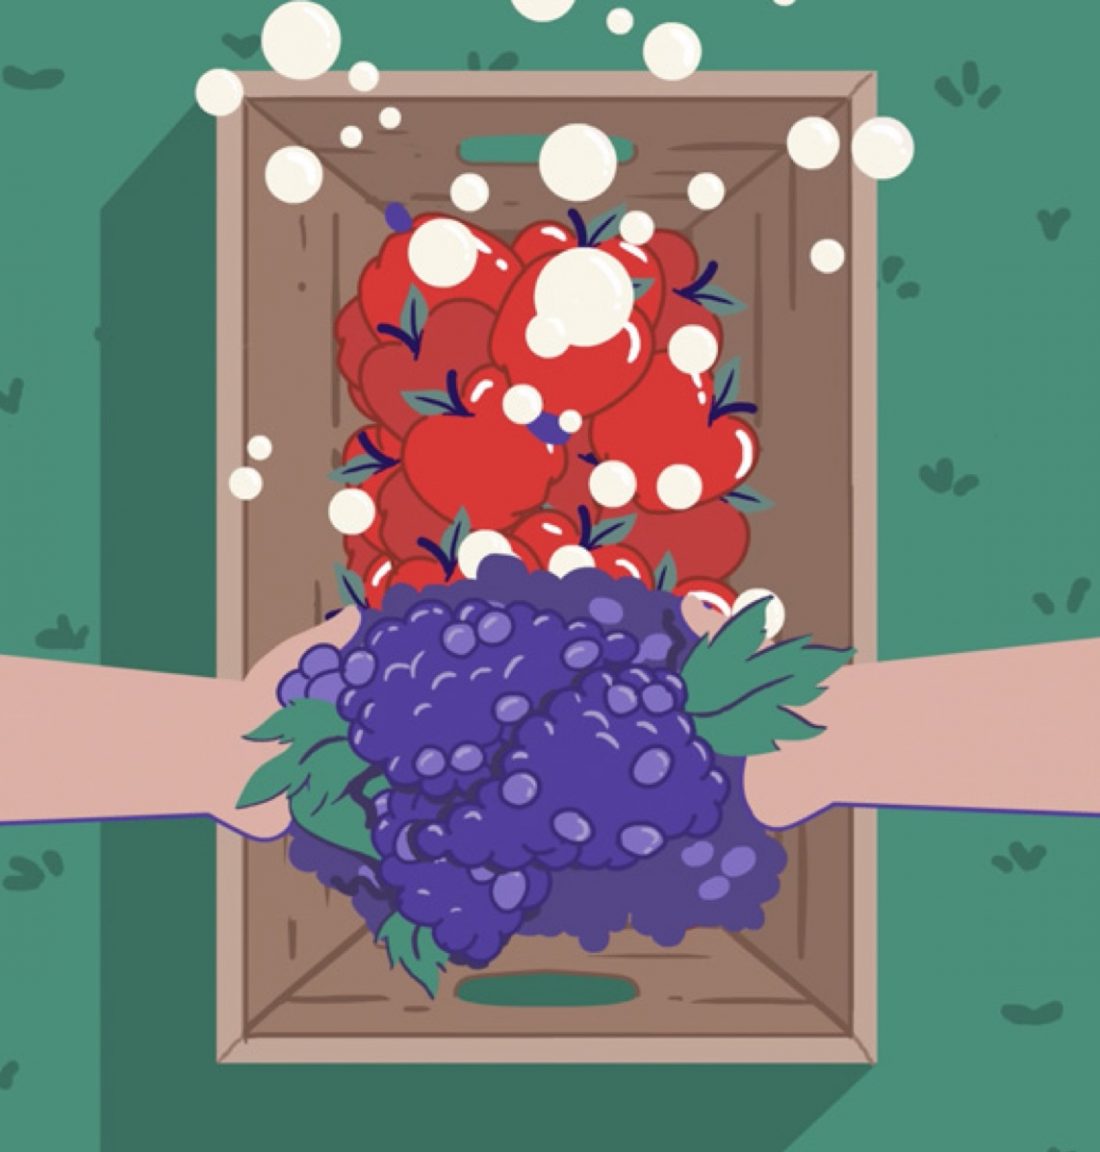 animated still of a crate of grapes and apples